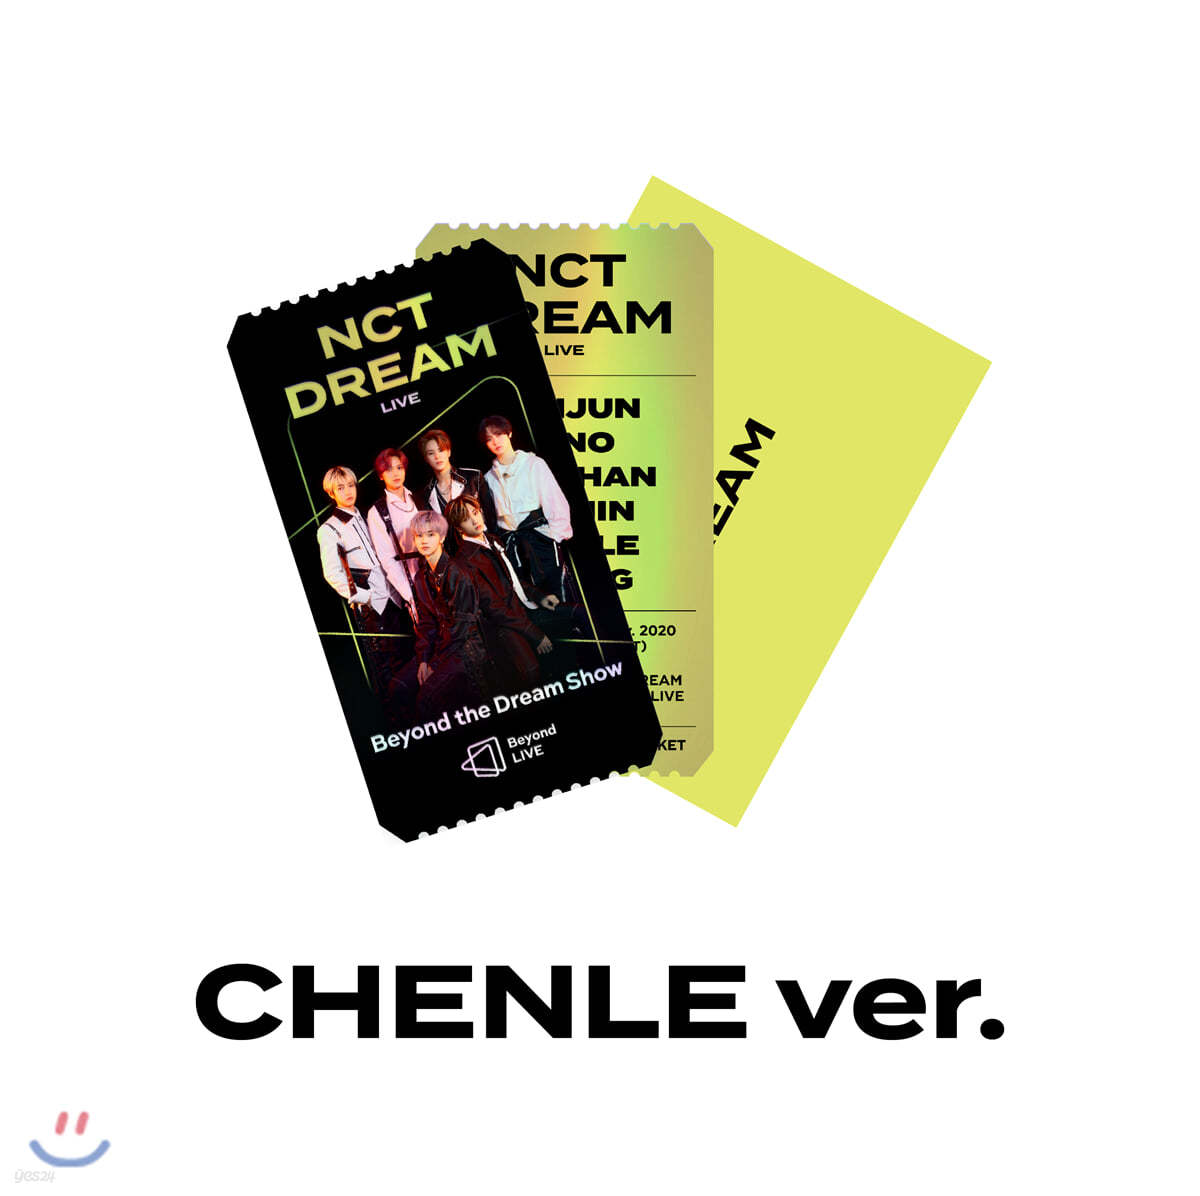 [CHENLE] NCT DREAM Beyond LIVE Beyond the Dream Show SPECIAL AR TICKET SET